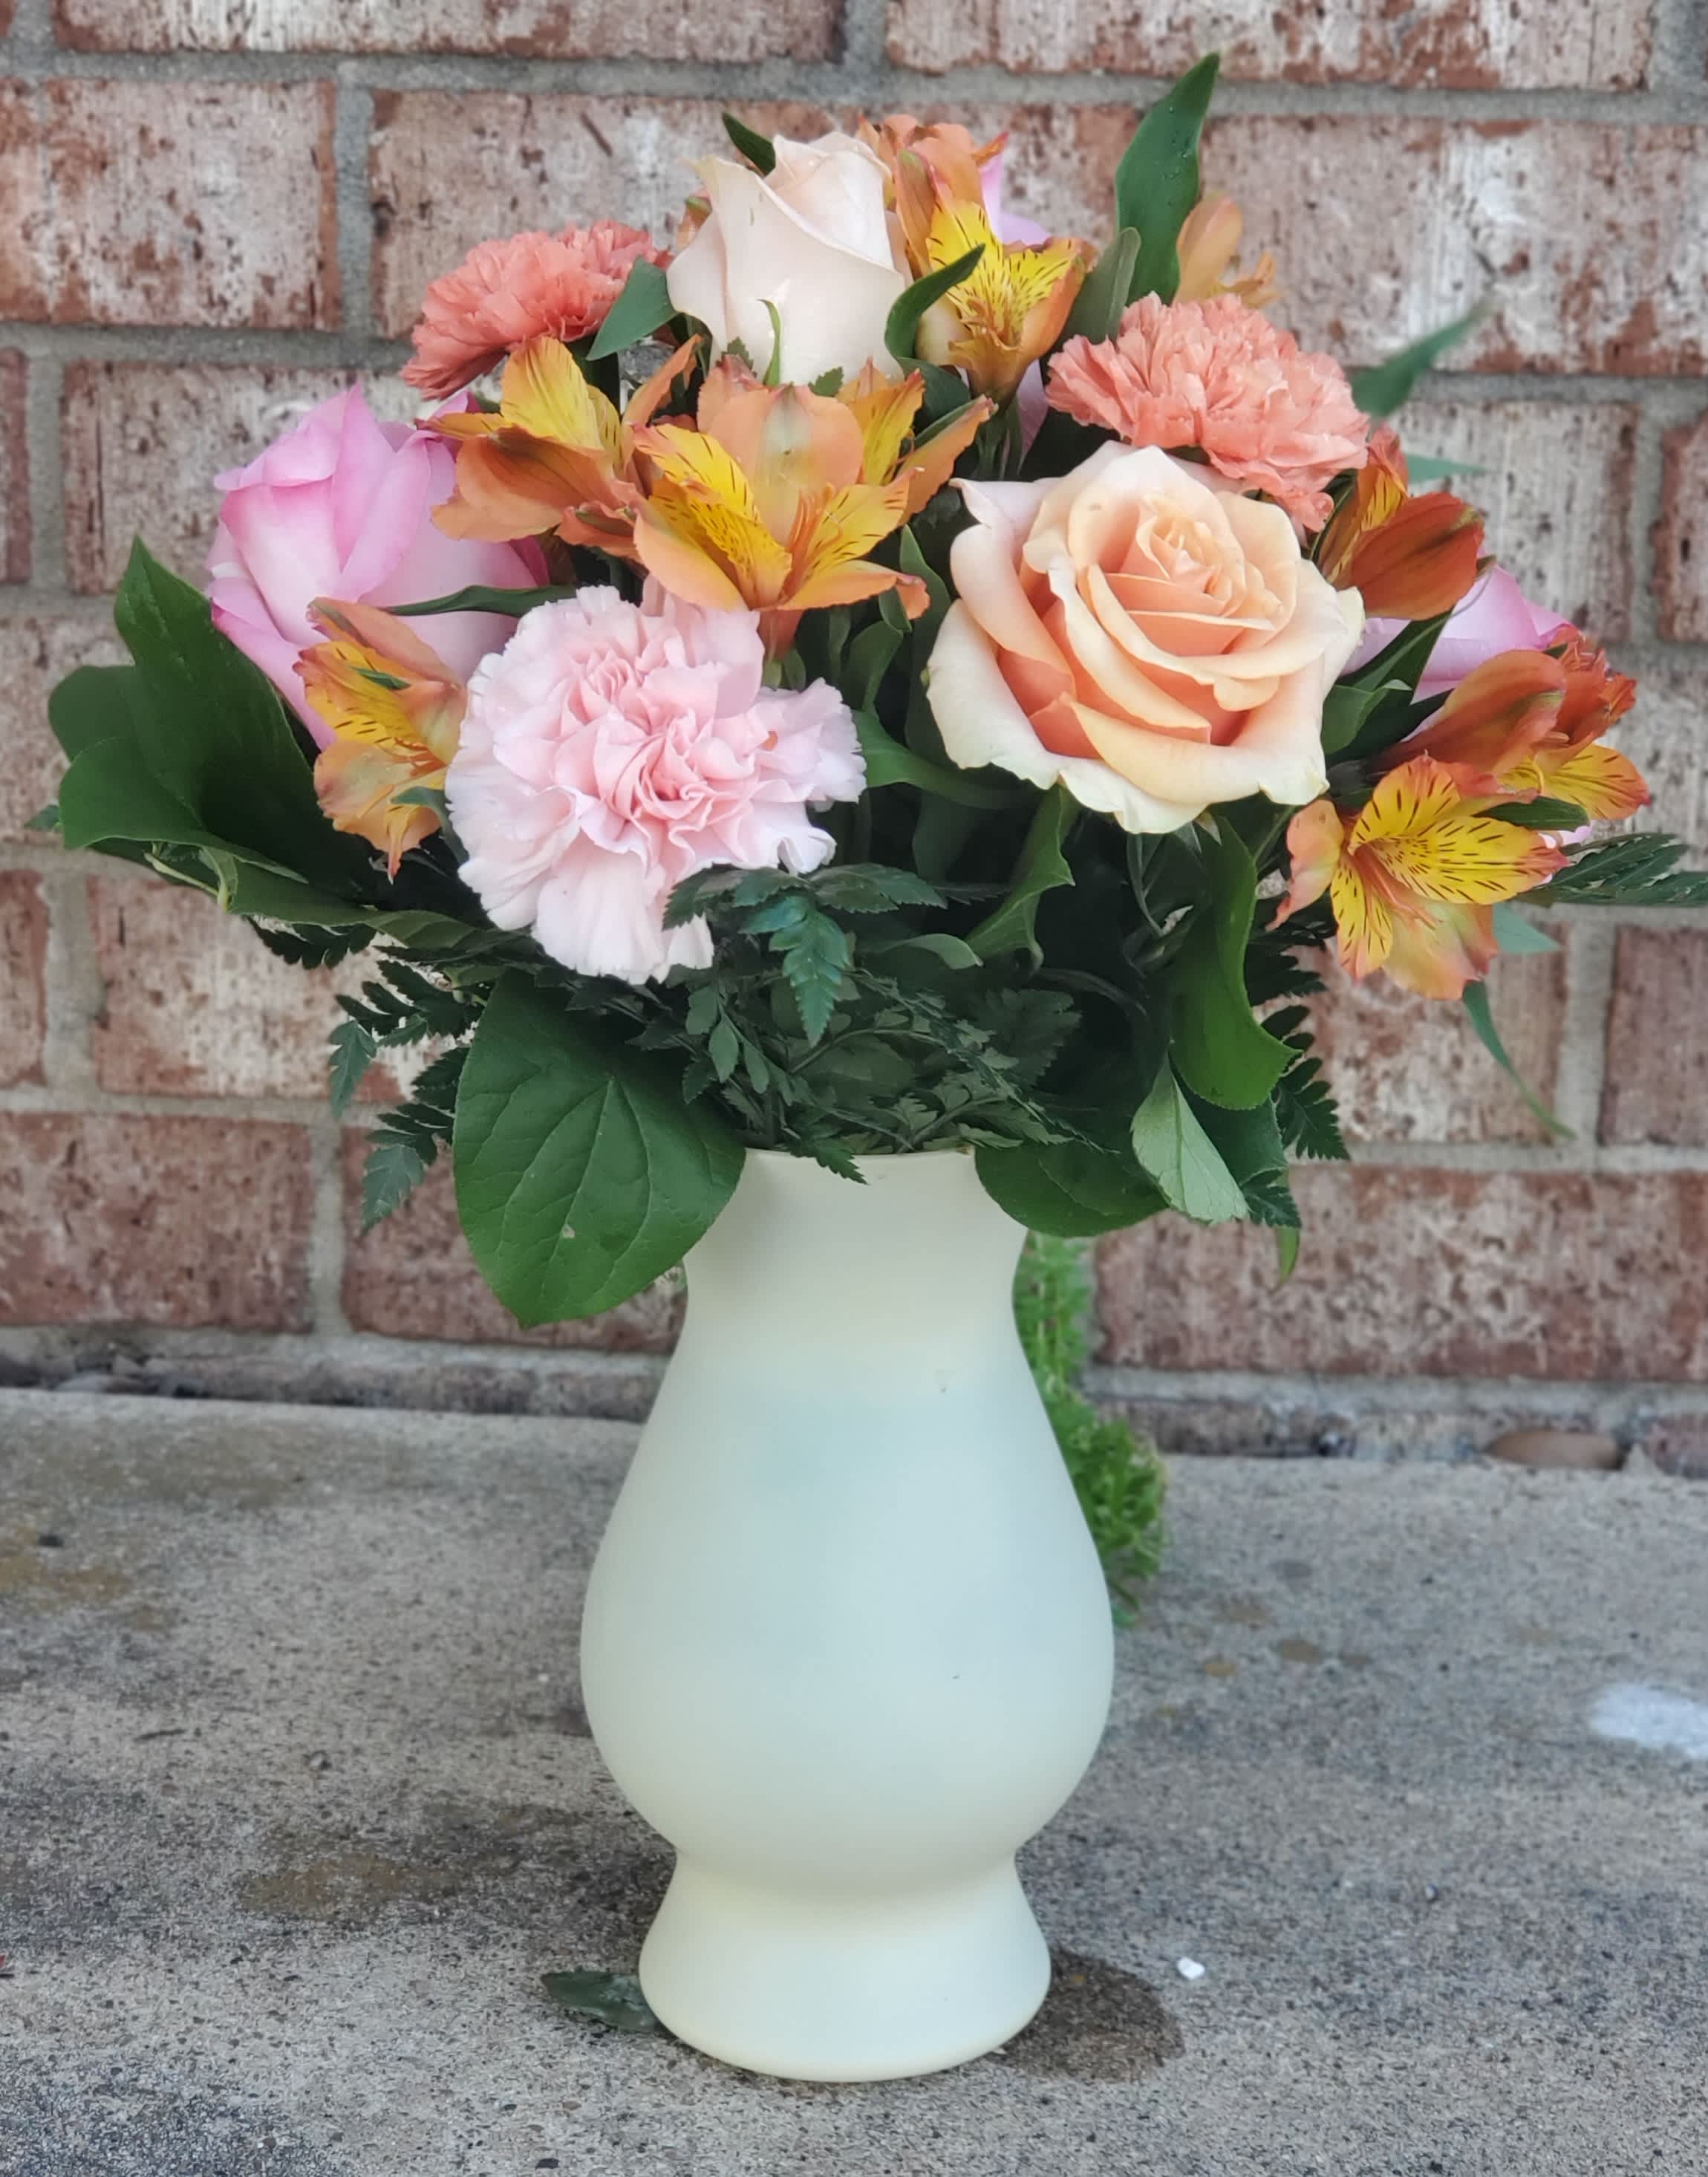 Texas Sunrise - You'll stay in your beloved's thoughts with this wonderful arrangement of sweet pinks and cheerful oranges. Featuring roses, carnations, and alstroemeria, this surprisingly simple arrangement makes a exciting statement!  Check out its accompanying design, the Texas Dreamin'!